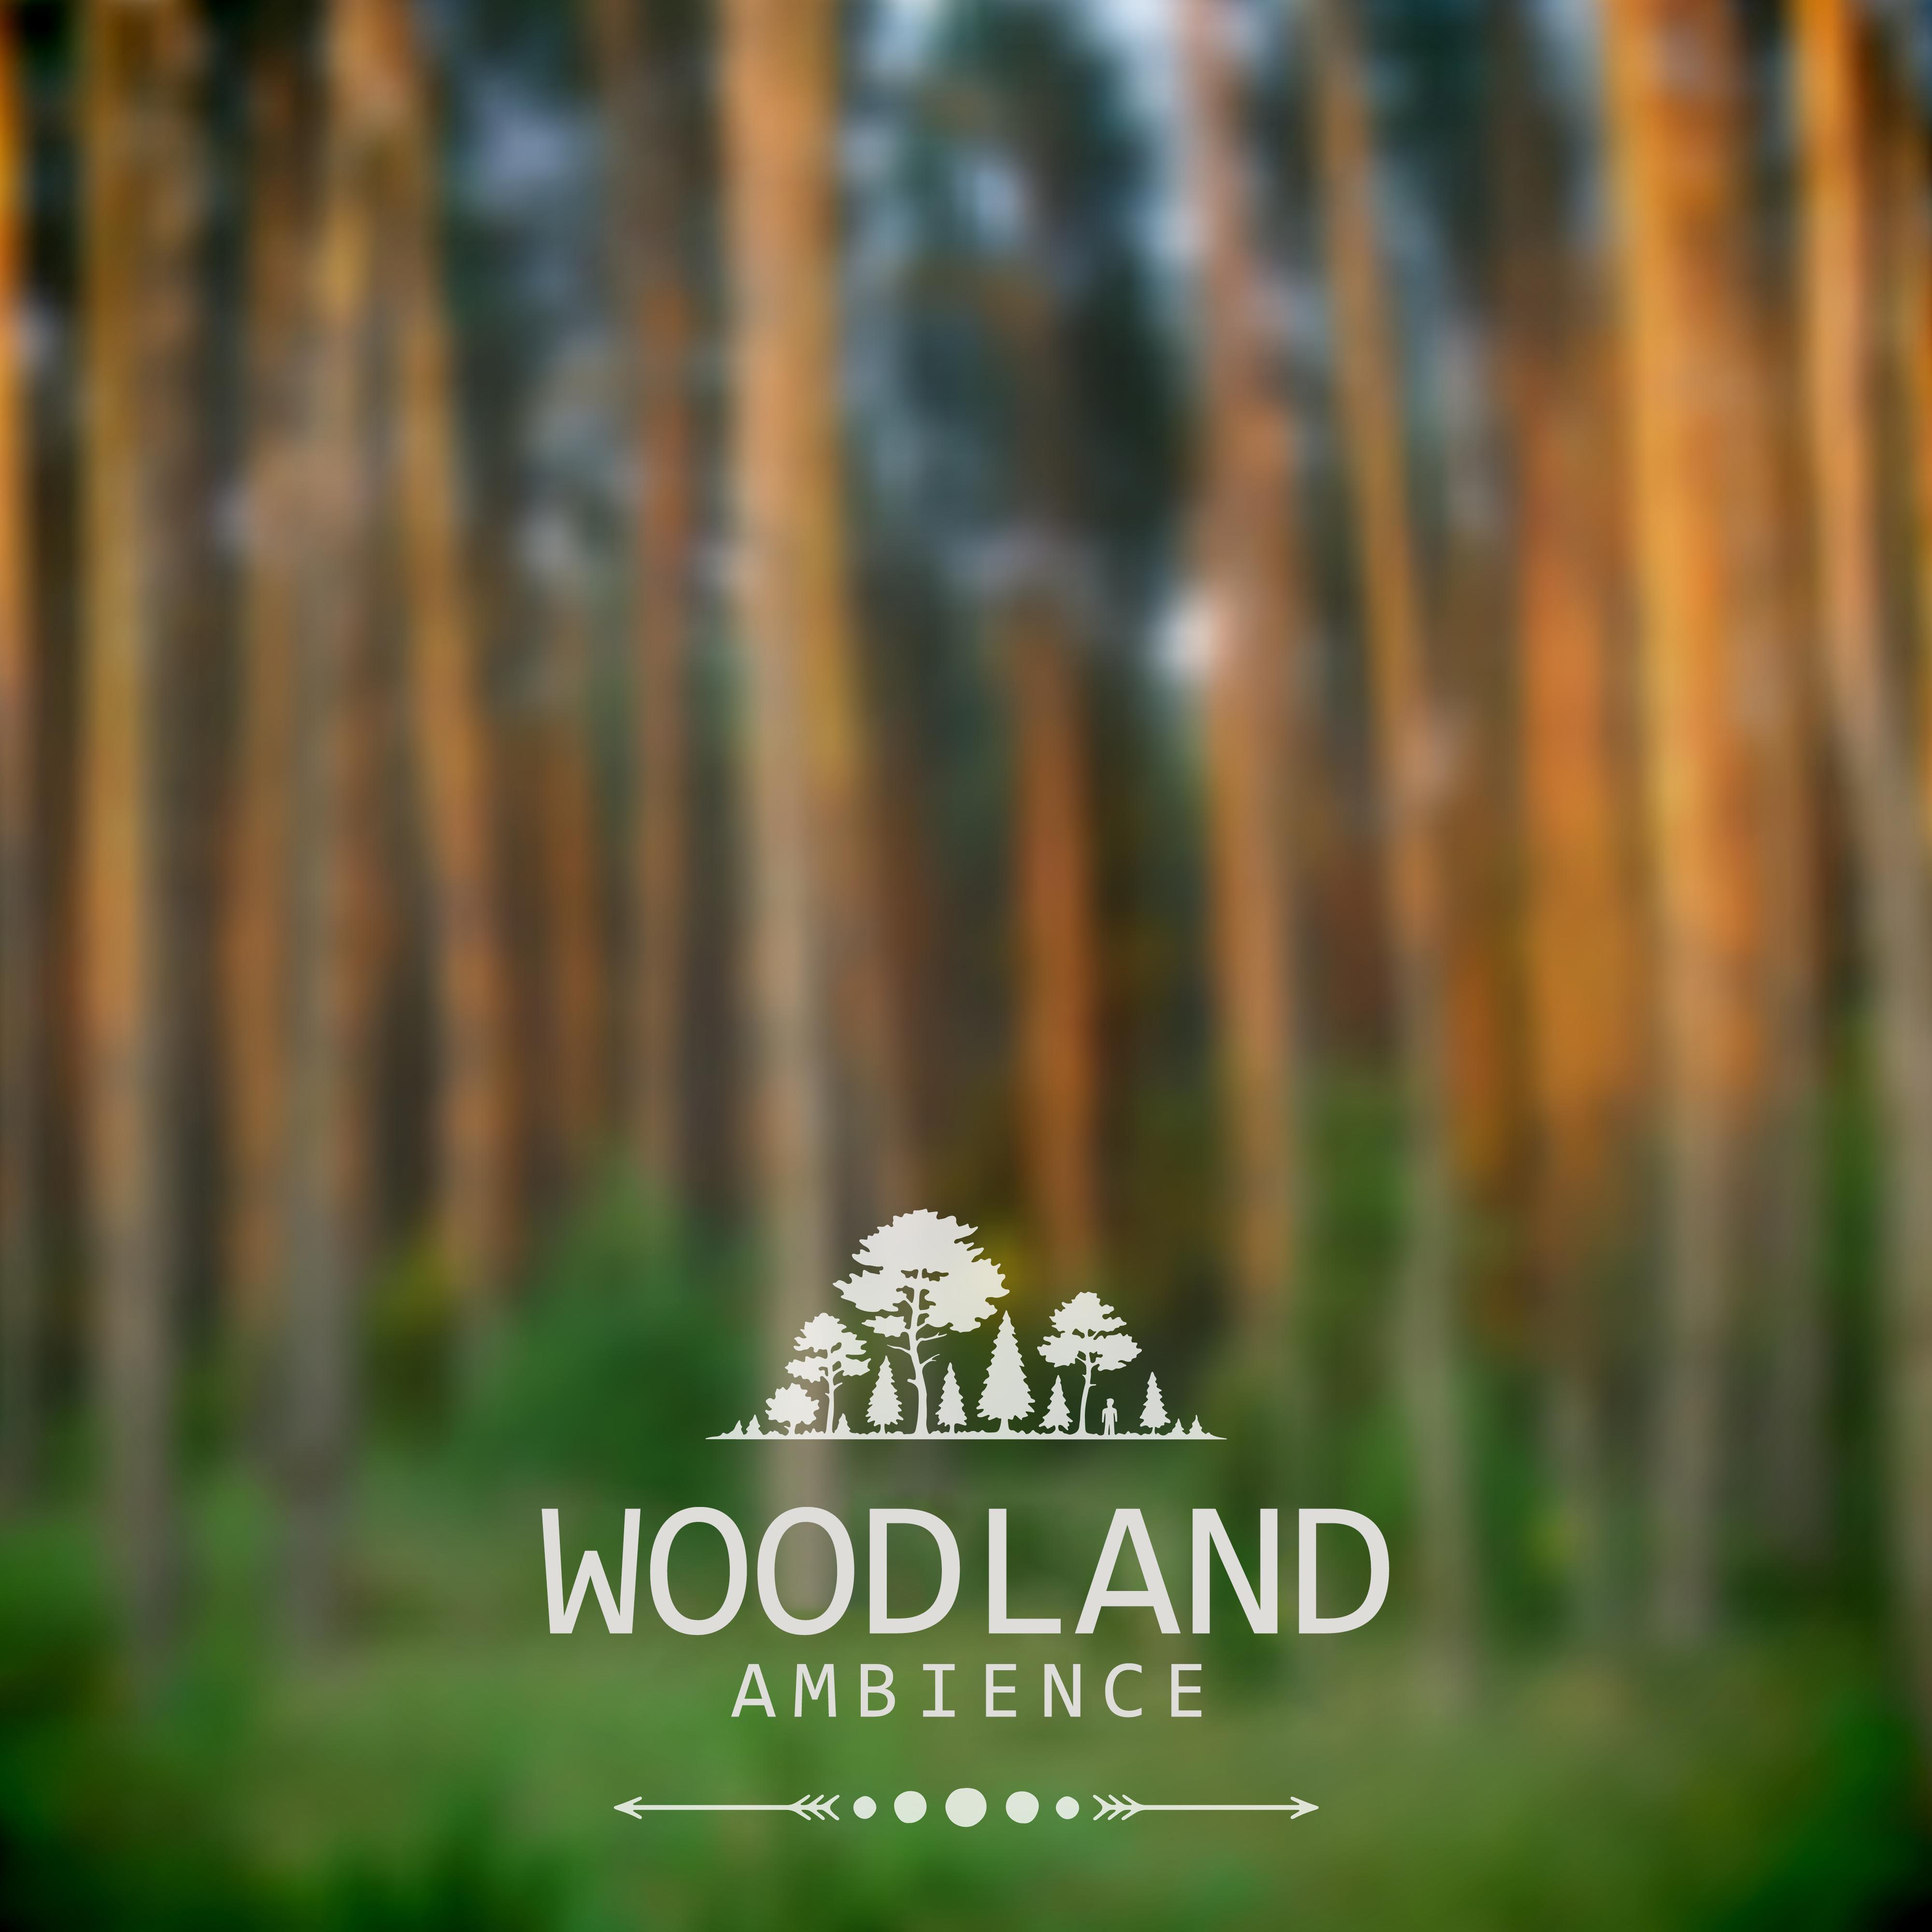 Woodland Ambience  Relaxing Sounds of Nature, Singing Forest Birds, Music for Moments of Relaxation and Rest, Gentle Piano Melodies in the Background of Nature